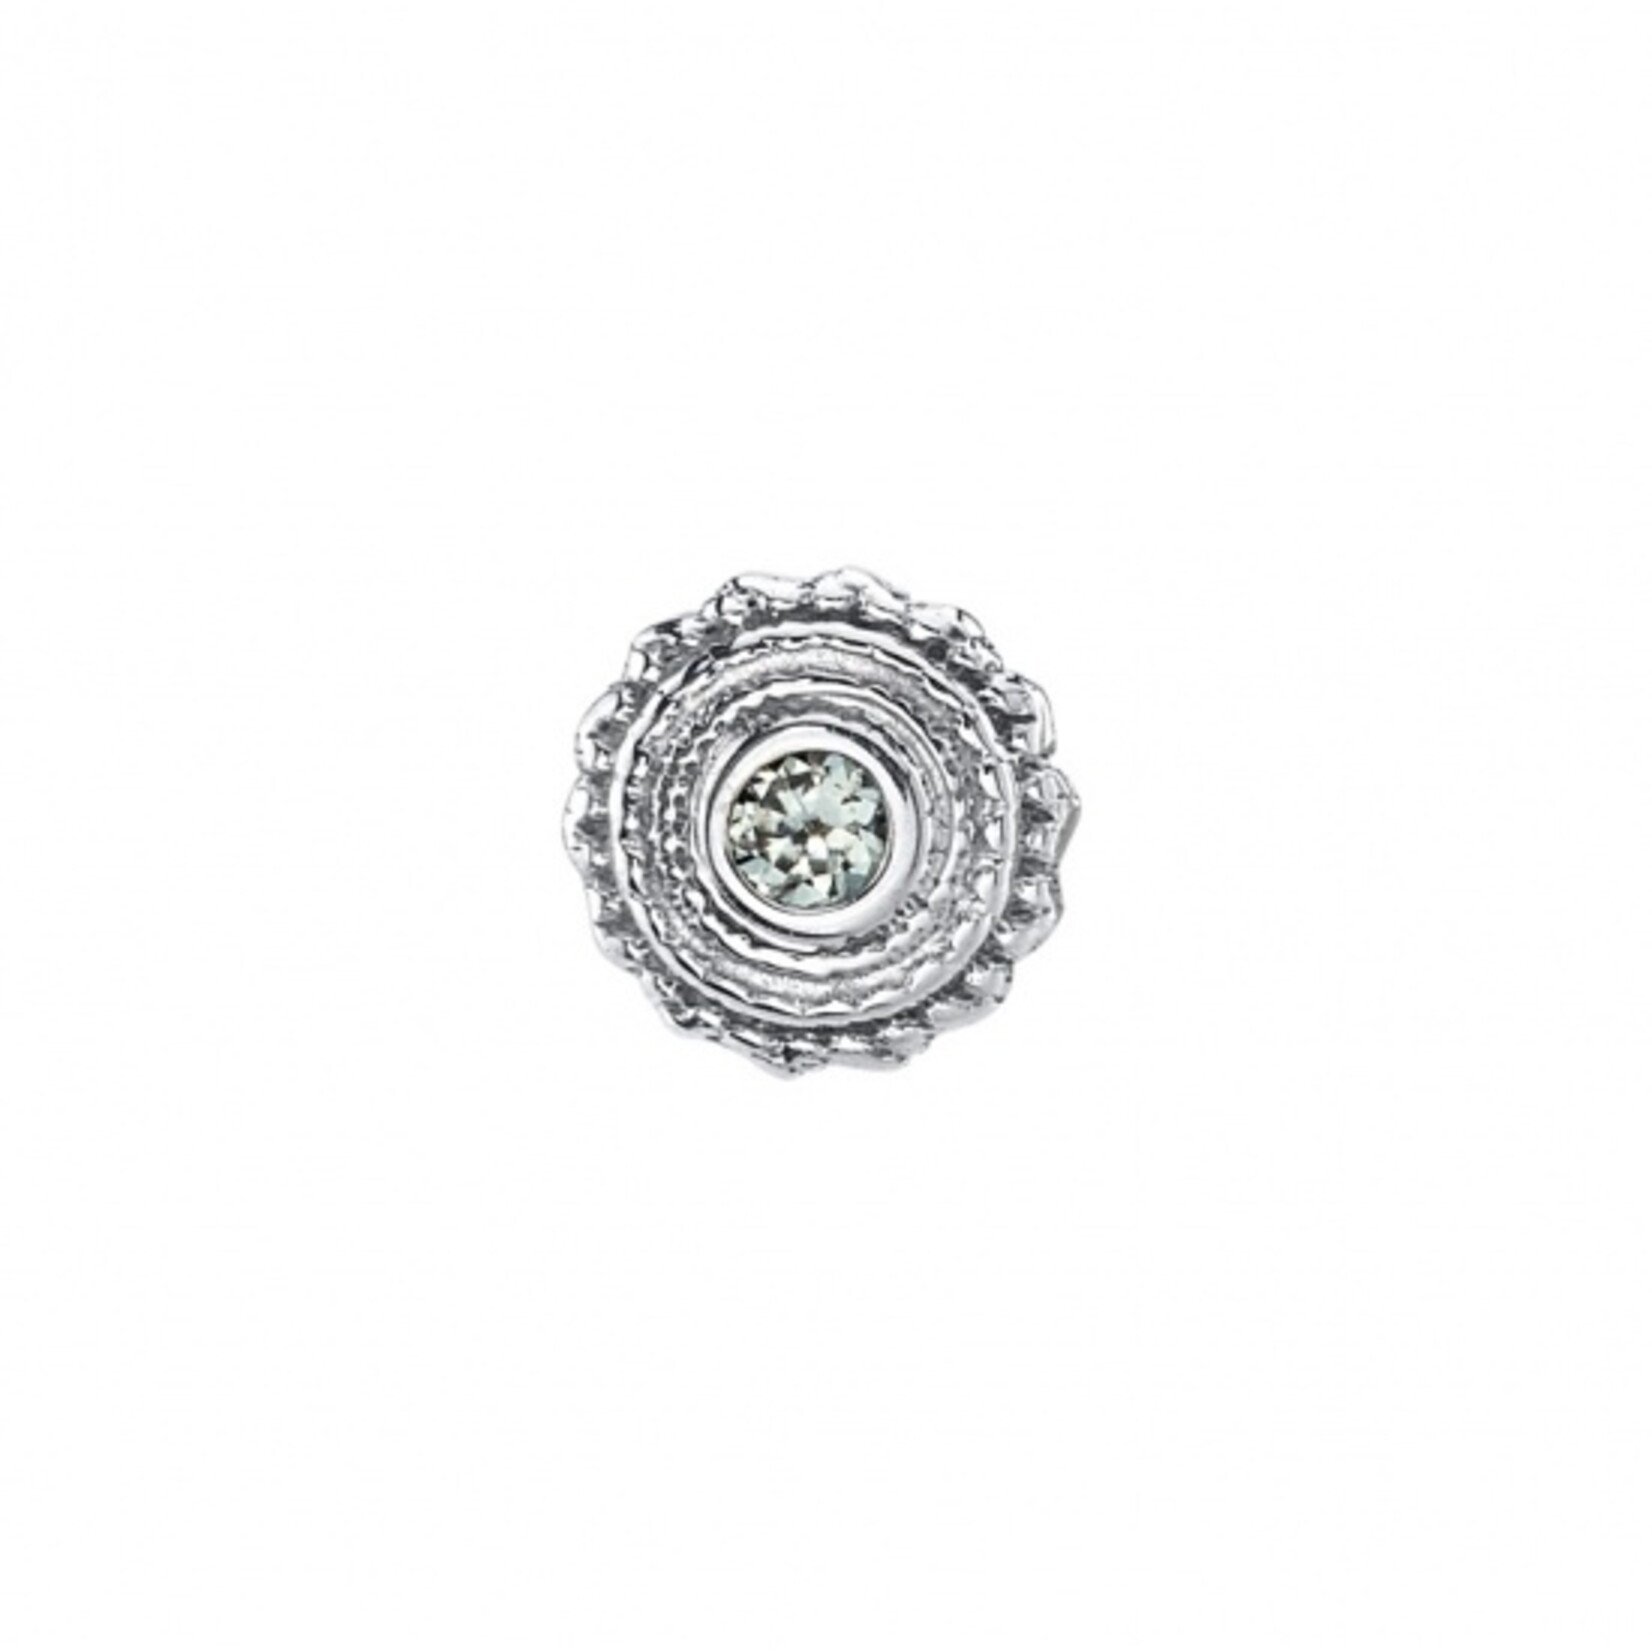 BVLA BVLA "Afghan" threaded end with CZ